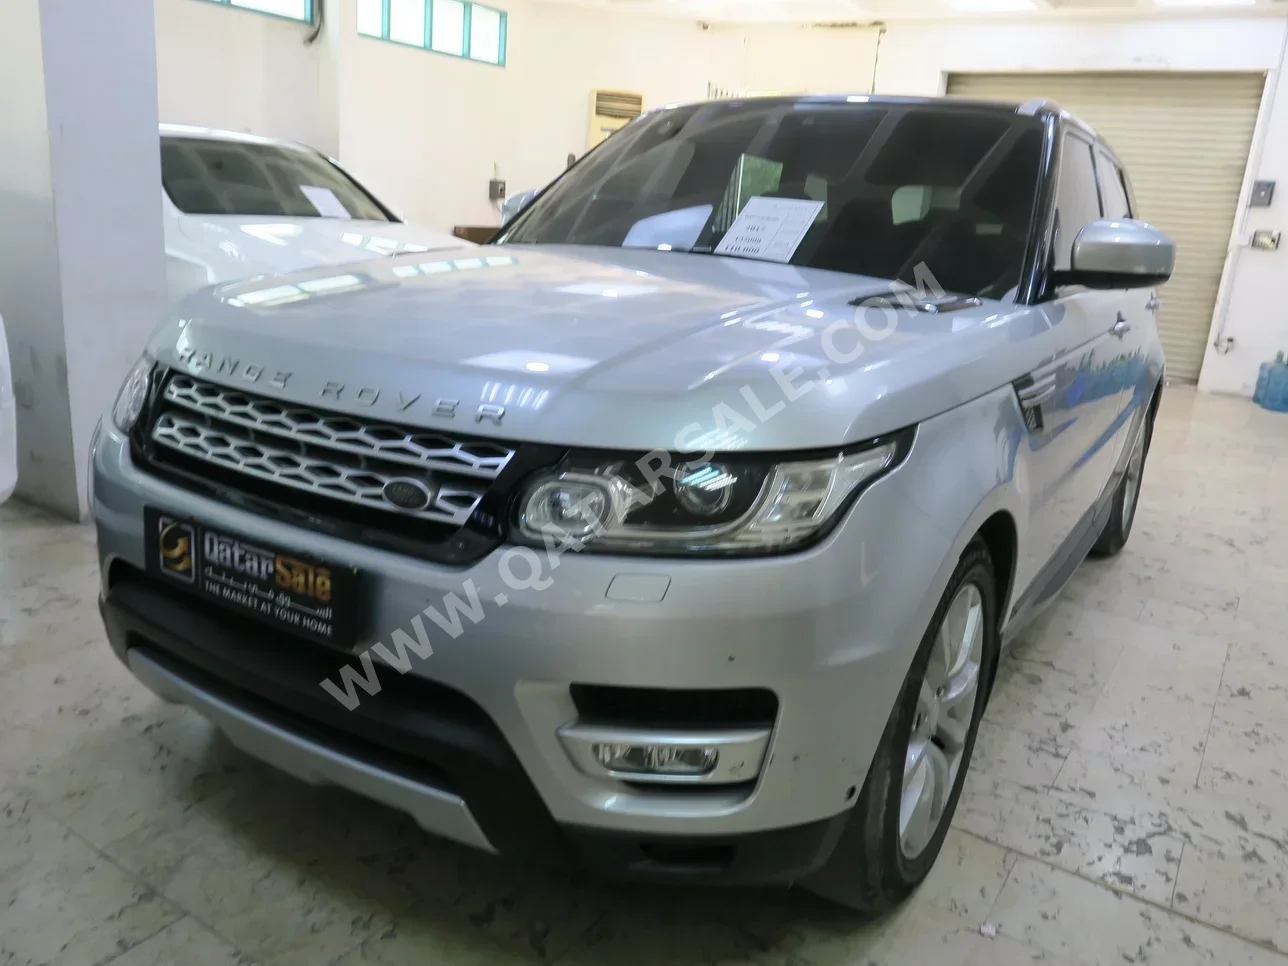 Land Rover  Range Rover  Sport HSE  2017  Automatic  135,000 Km  6 Cylinder  Four Wheel Drive (4WD)  SUV  Silver